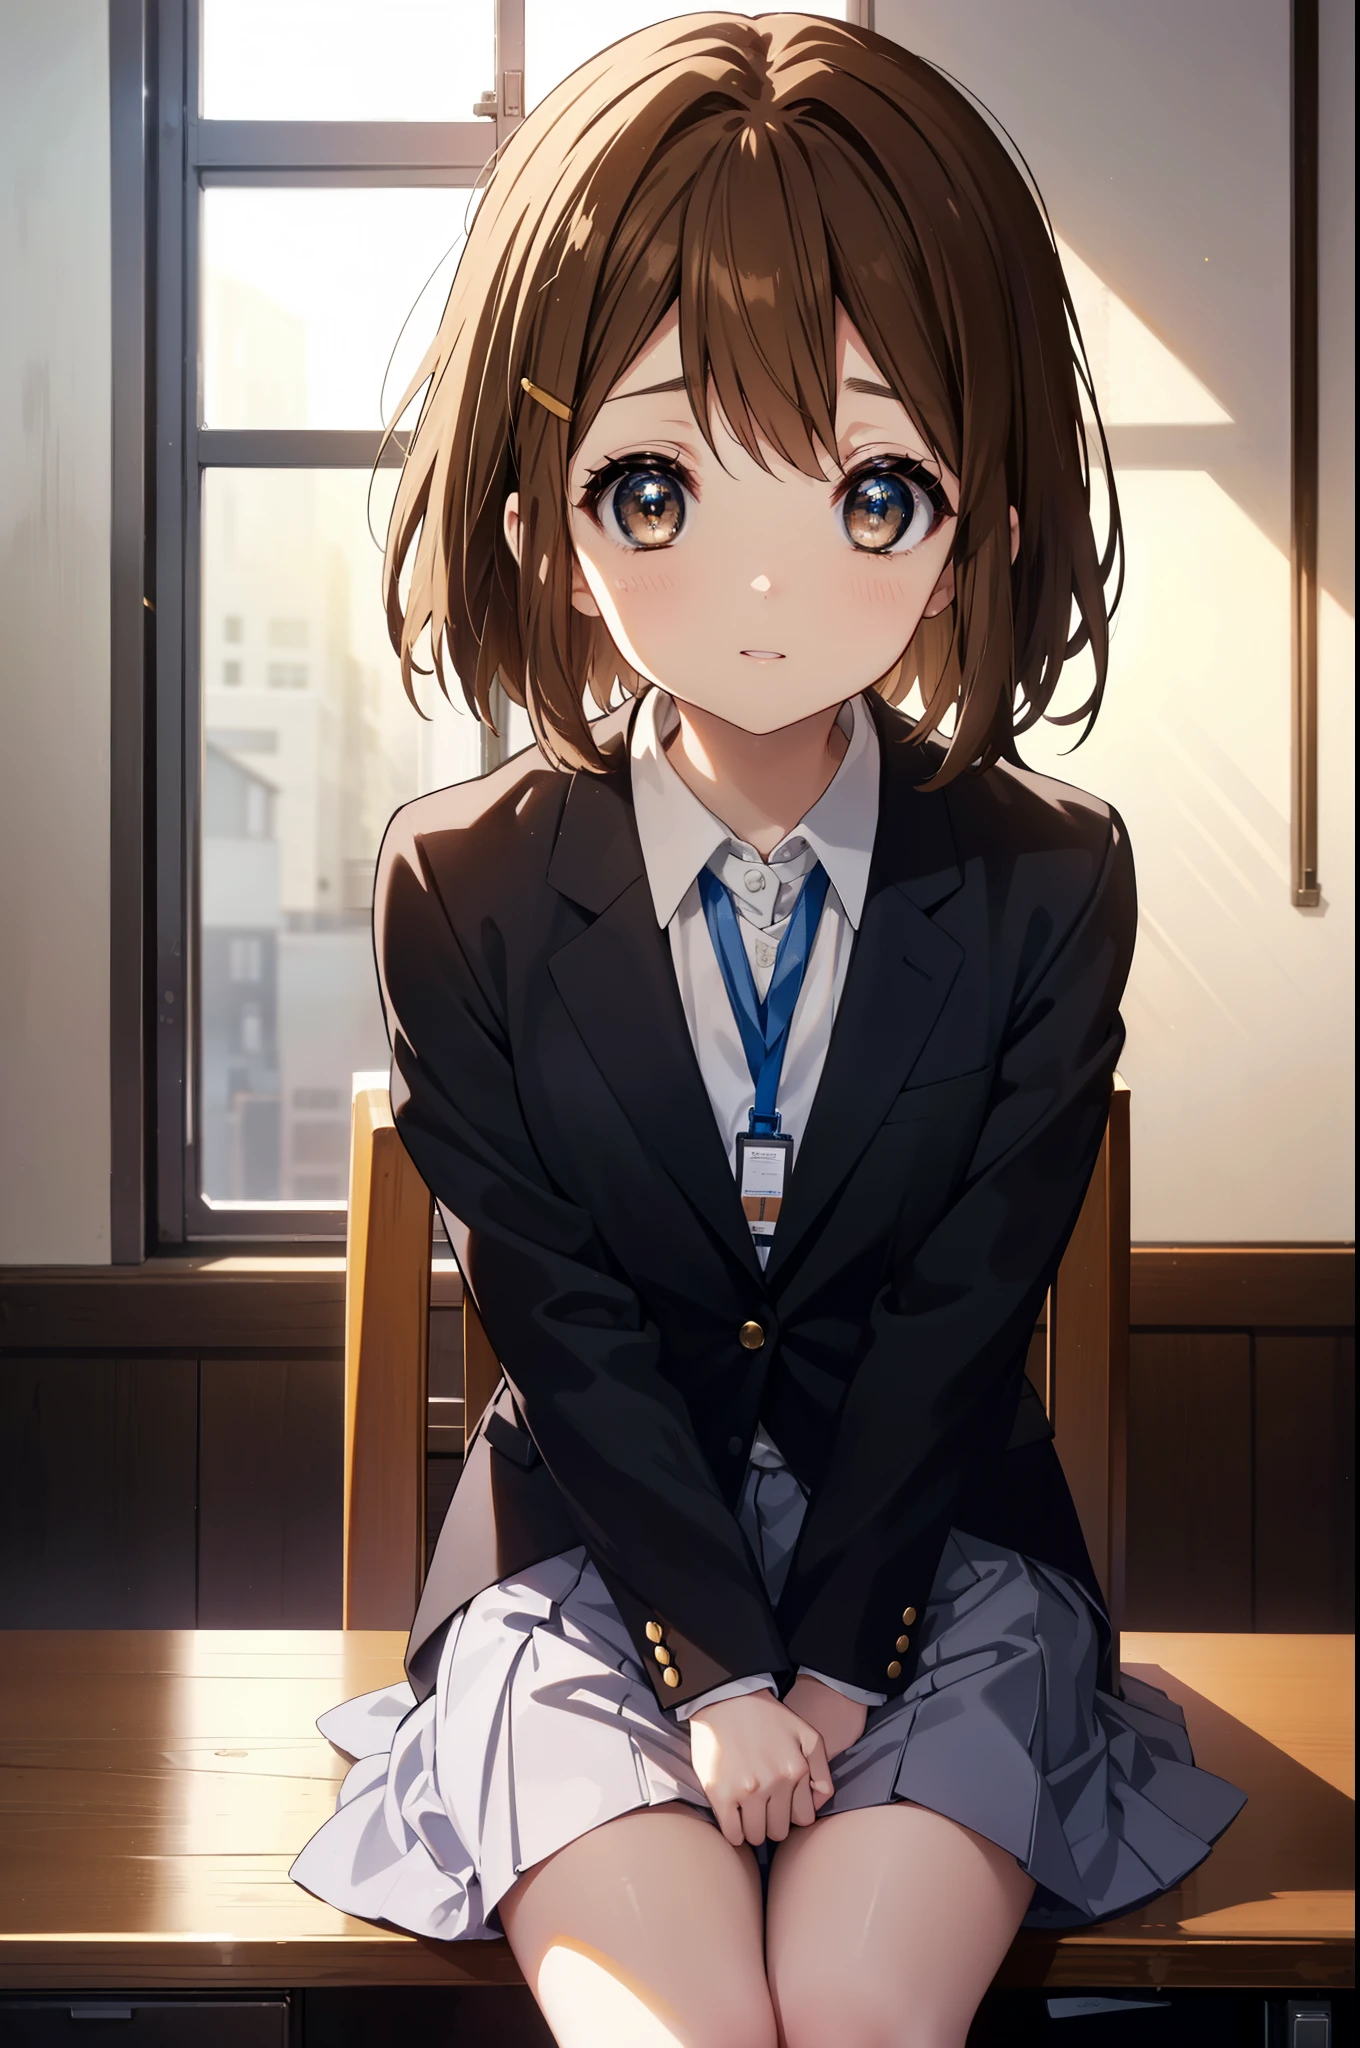 yuihirasawa, yui hirasawa, short hair, brown hair, hair ornaments, (brown eyes:1.5), hair clip、OL, Black Abyss glasses, end, black suit jacket, collared jacket, white dress shirt, collared shirt, neckline, button, strap, ID card on neck, black pencil skirt, black pantyhose, stiletto heels,sitting cross-legged on a chair,There is a computer on the desk.,smile, blush, 視聴者を見ている
BREAK indoors, classroom,
BREAK looking at viewer, (cowboy shot:1.5),
BREAK (masterpiece:1.2), highest quality, High resolution, unity 8k wallpaper, (figure:0.8), (detailed and beautiful eyes:1.6), highly detailed face, perfect lighting, Very detailed CG, (perfect hands, perfect anatomy),